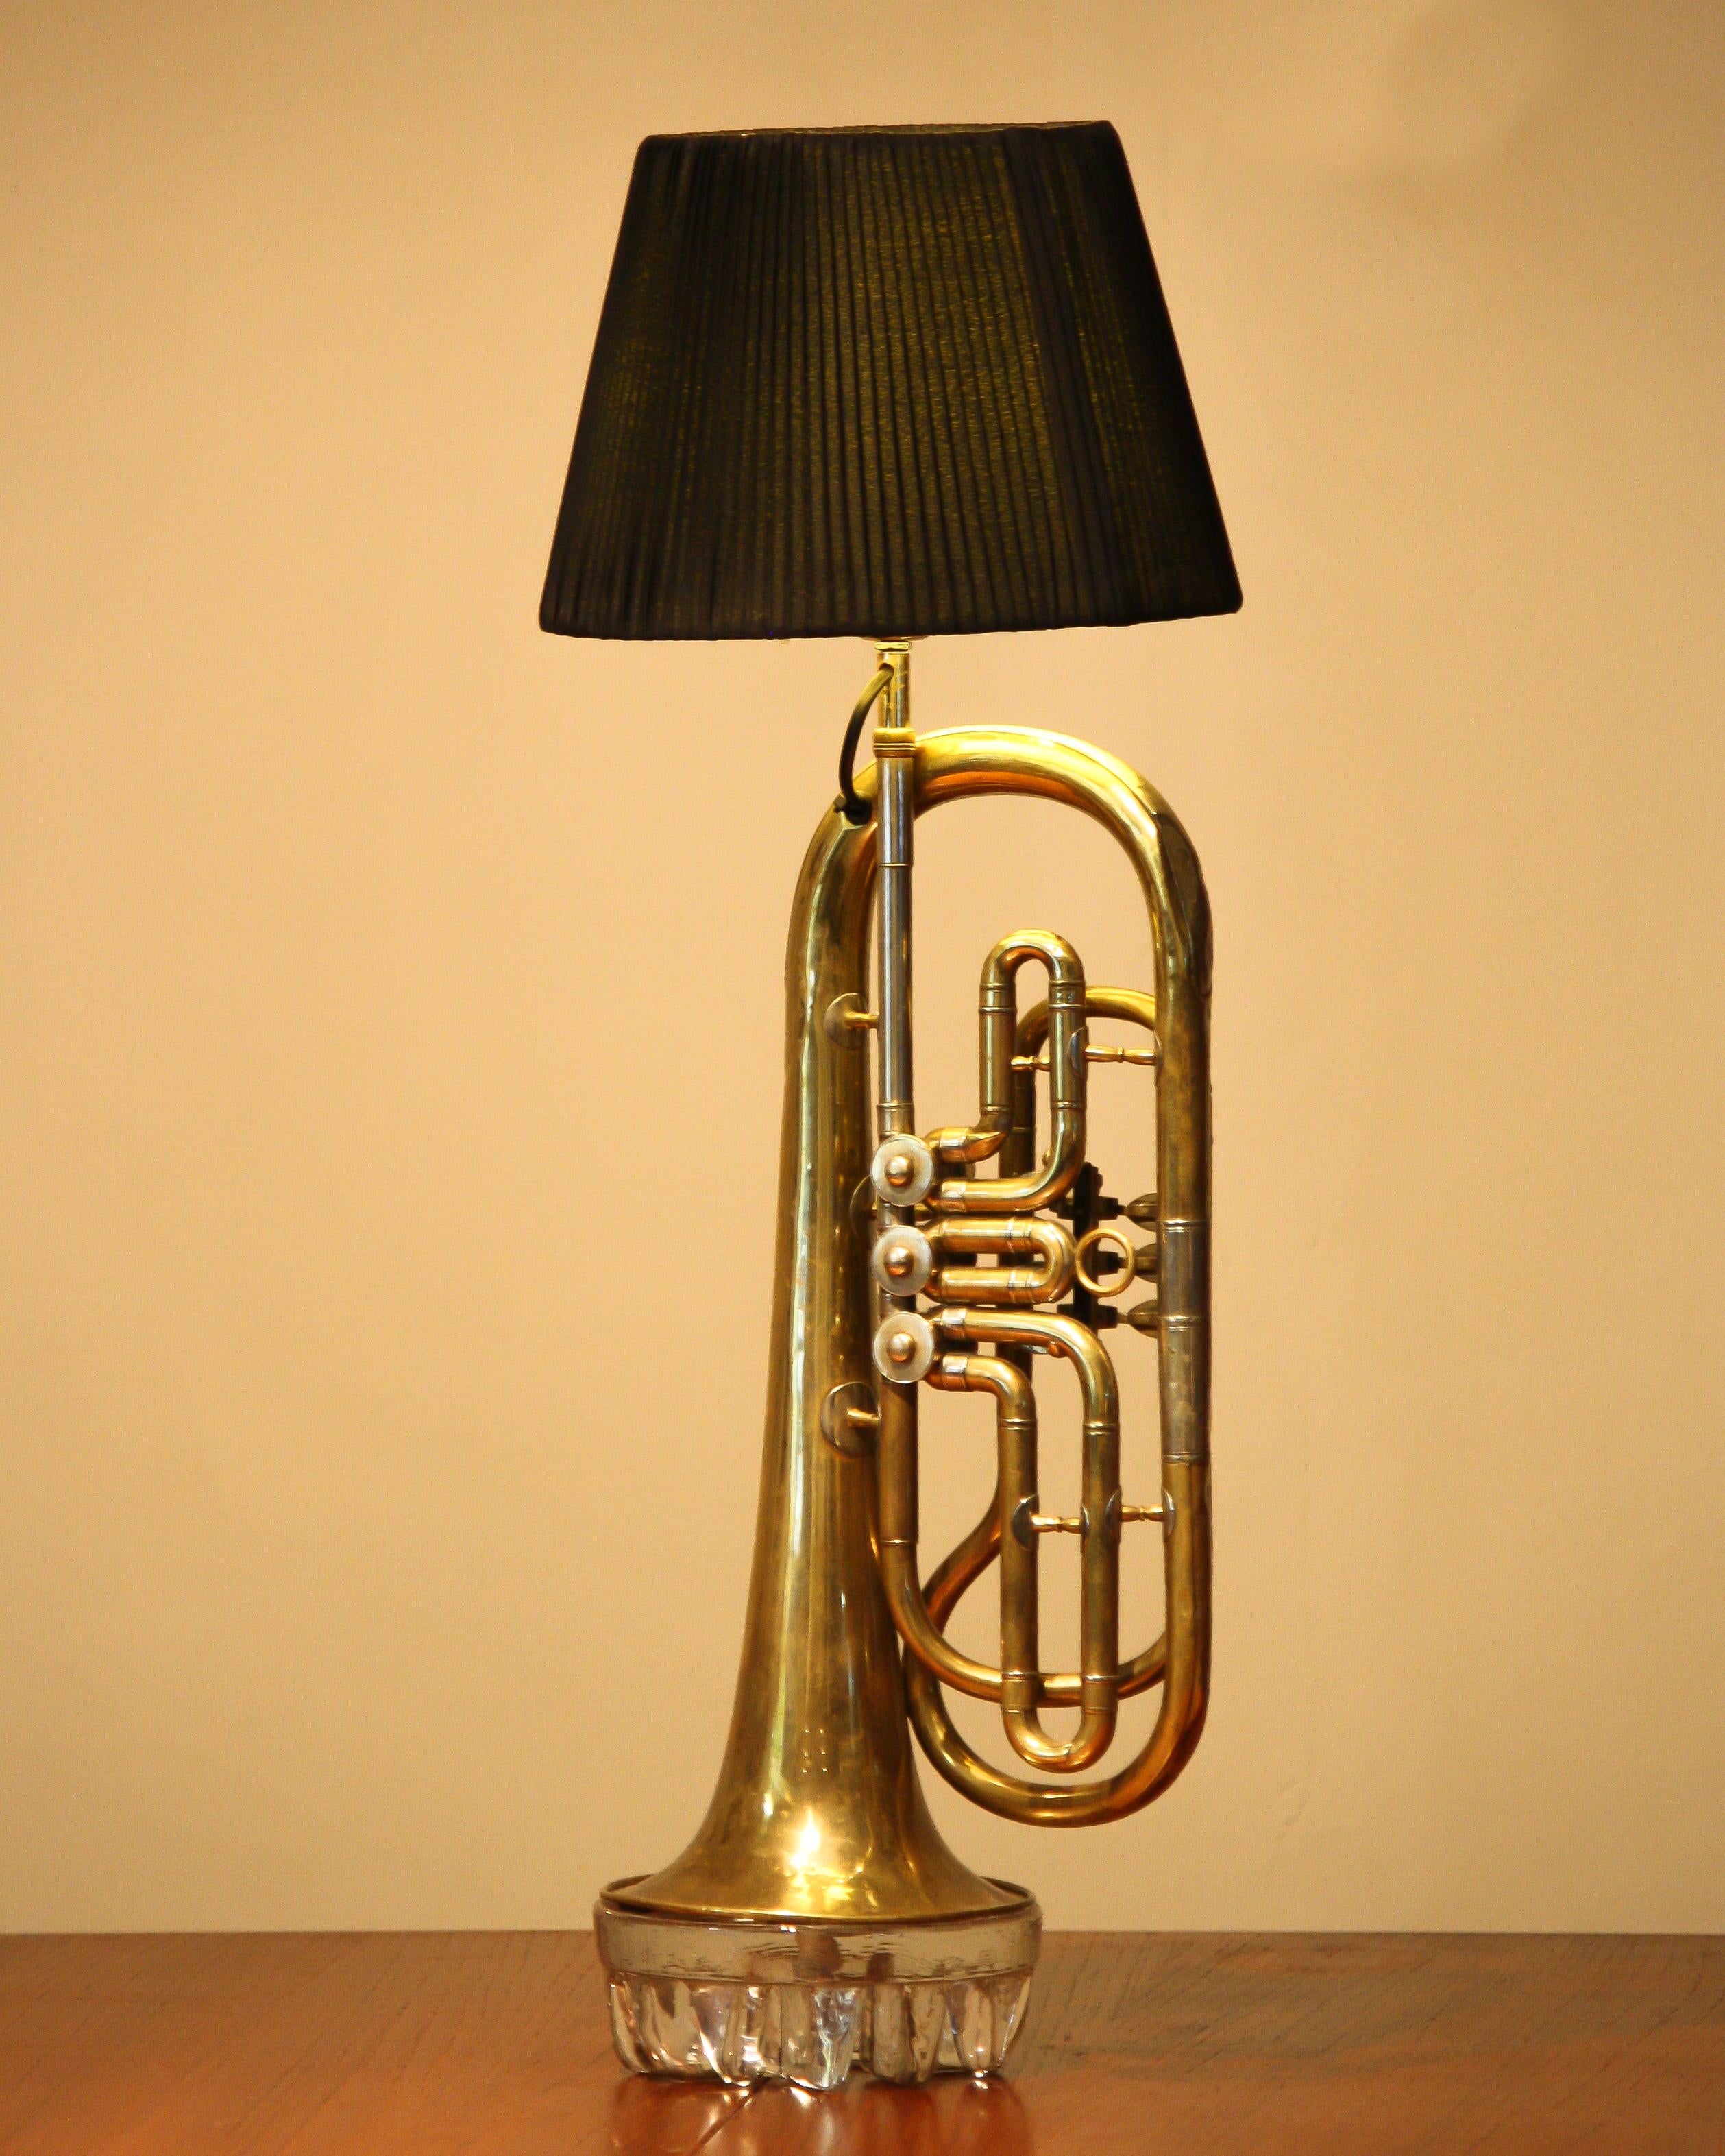 Glass Table Lamp Made of an American Cornet Flaps Trumpet from 1920s in Art Deco Style